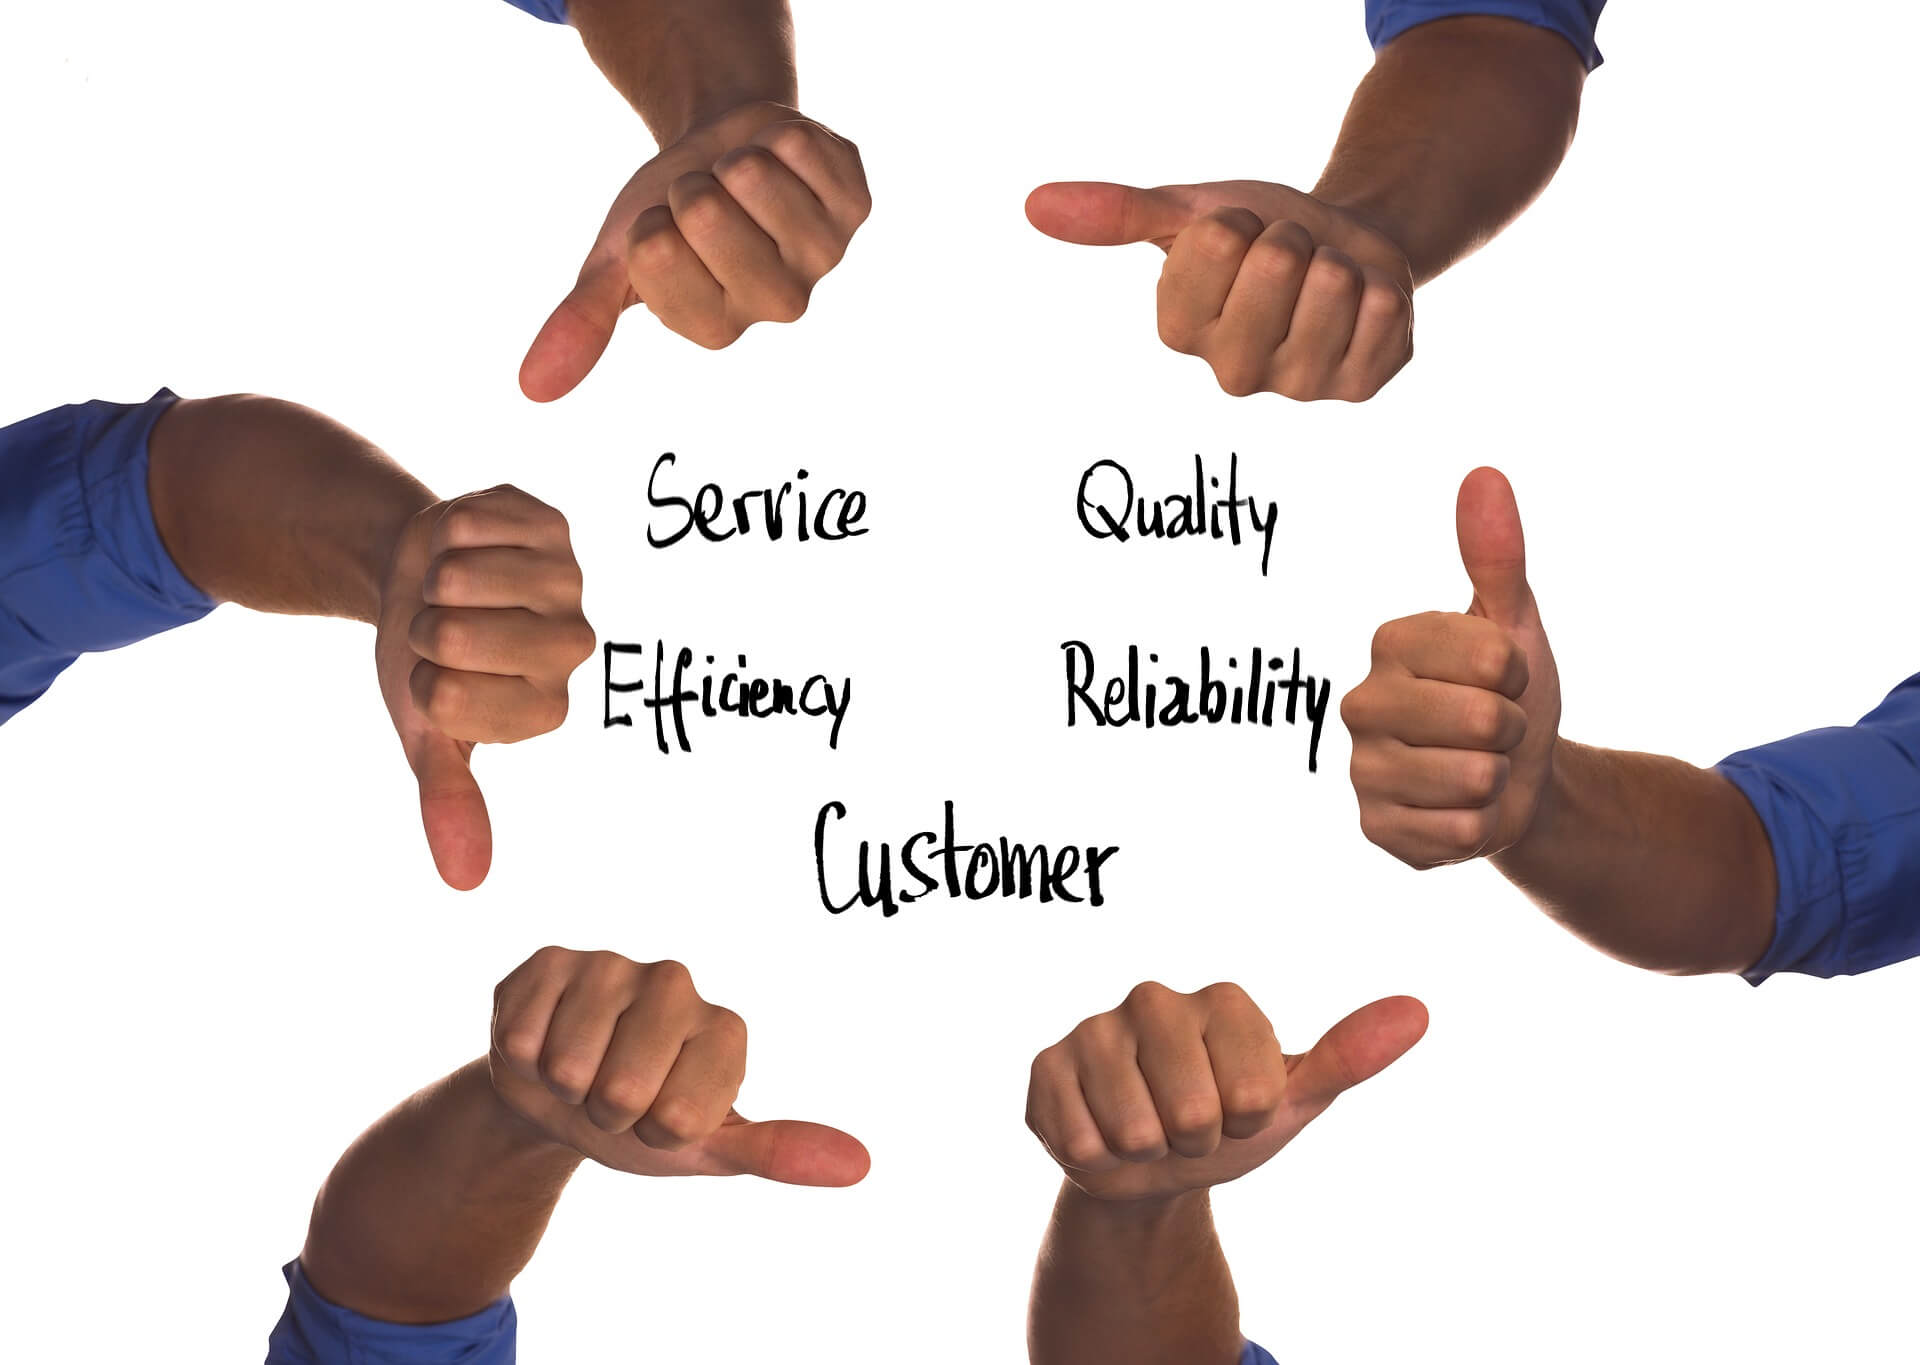 The New Qualities for Customer Service Excellence